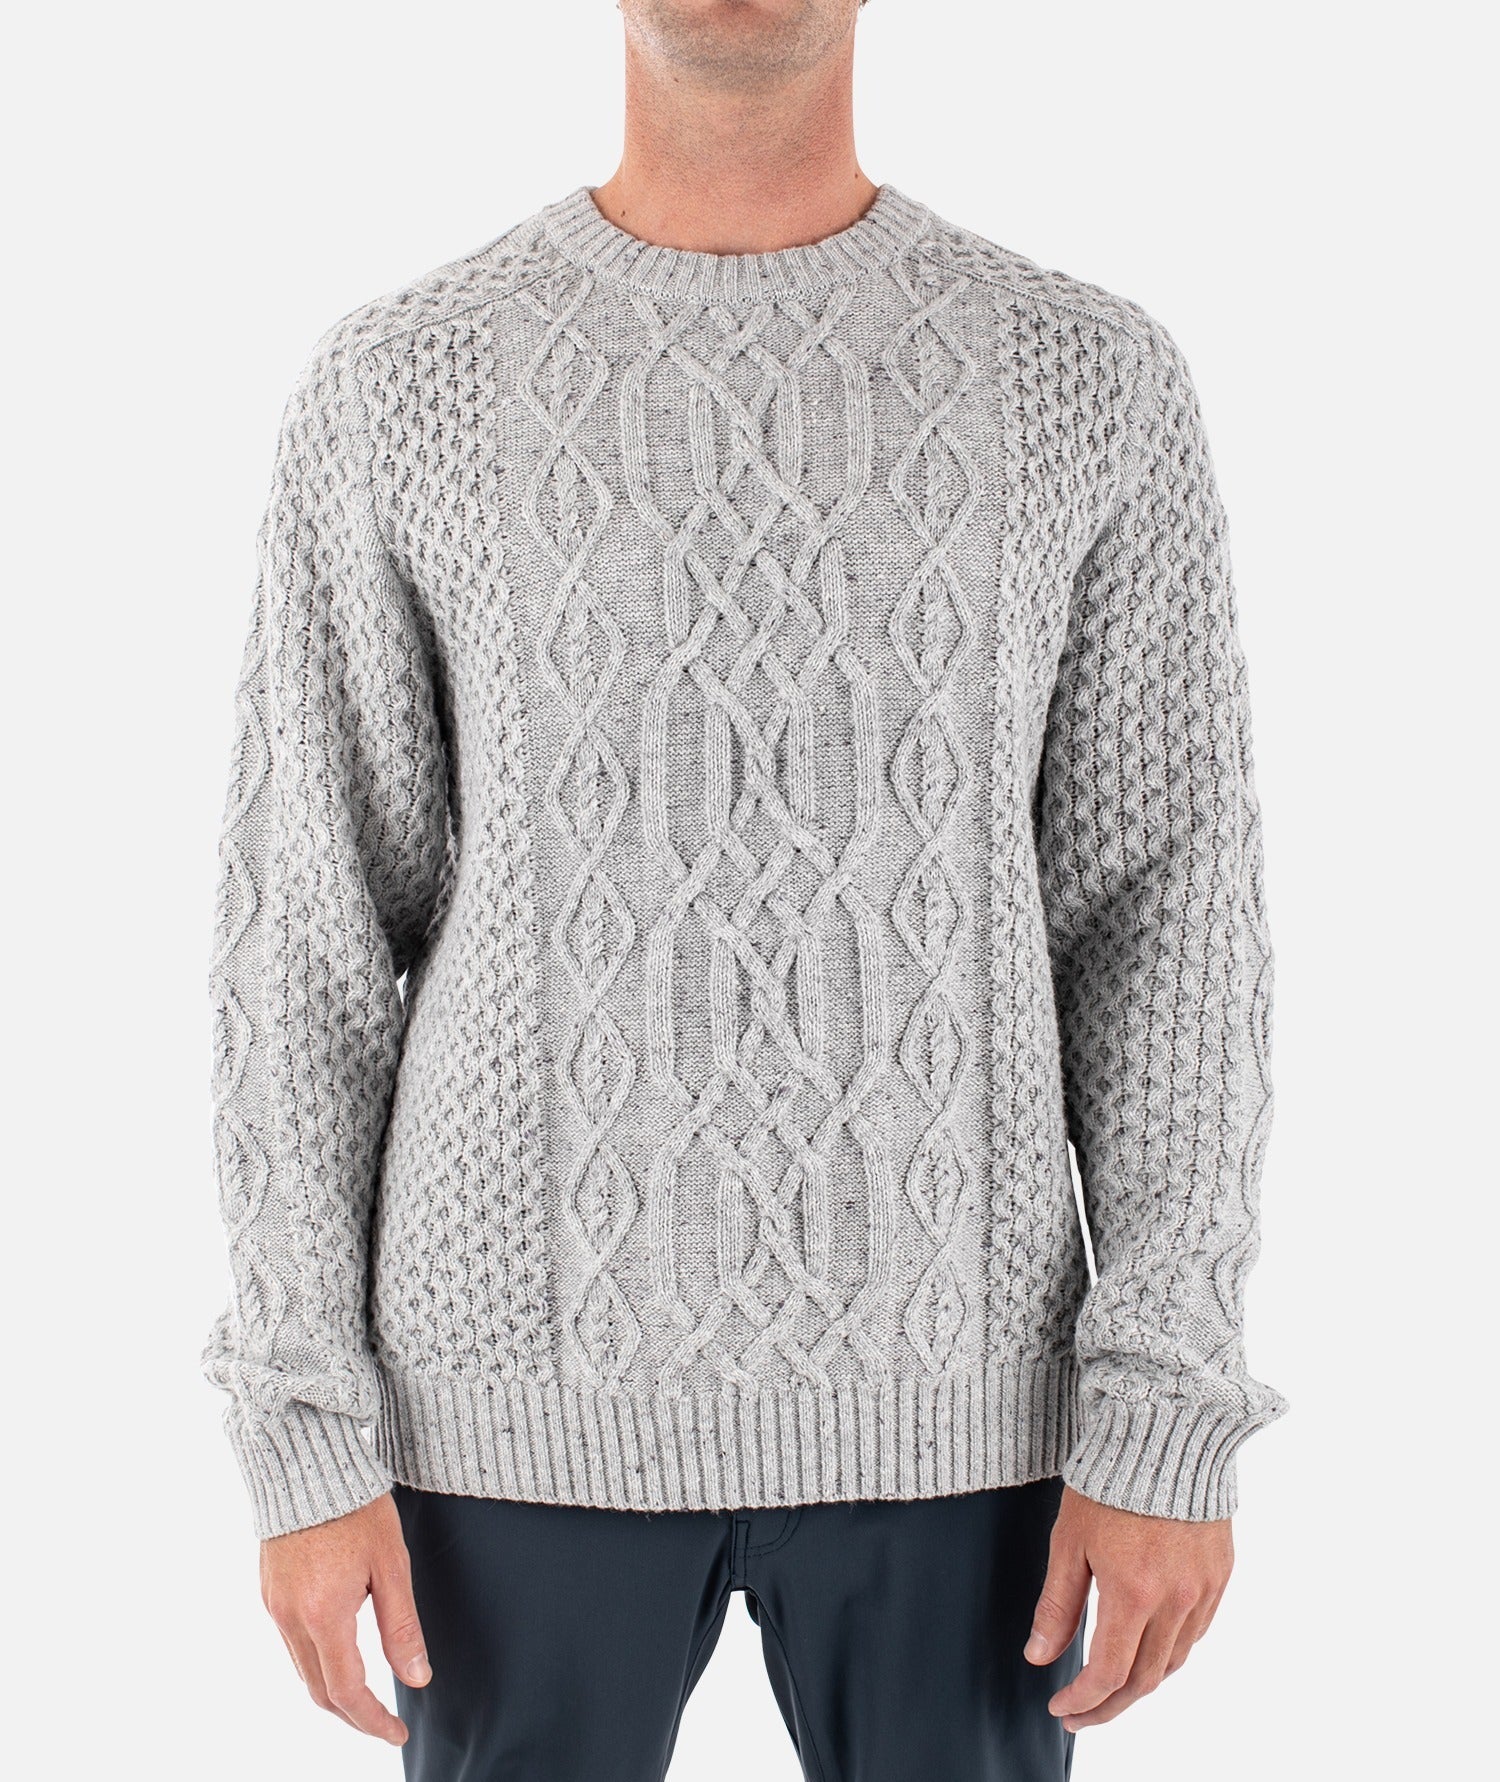 Group: Angler Oystex Sweater